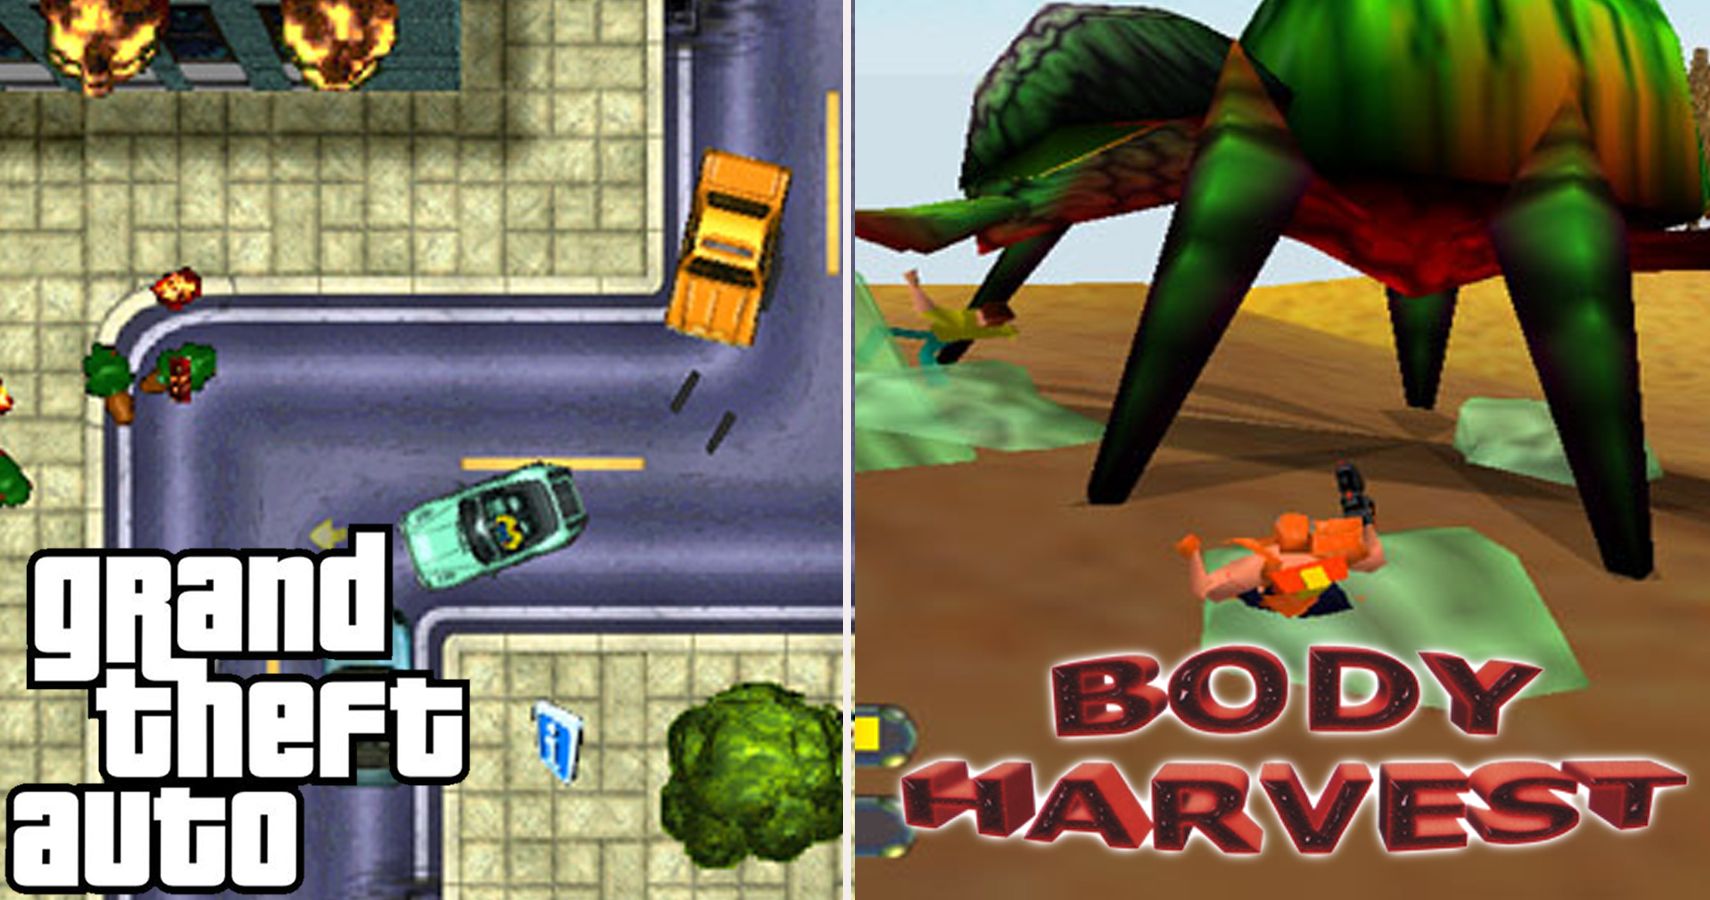 15 Terrible Levels That Spoiled Amazing Games